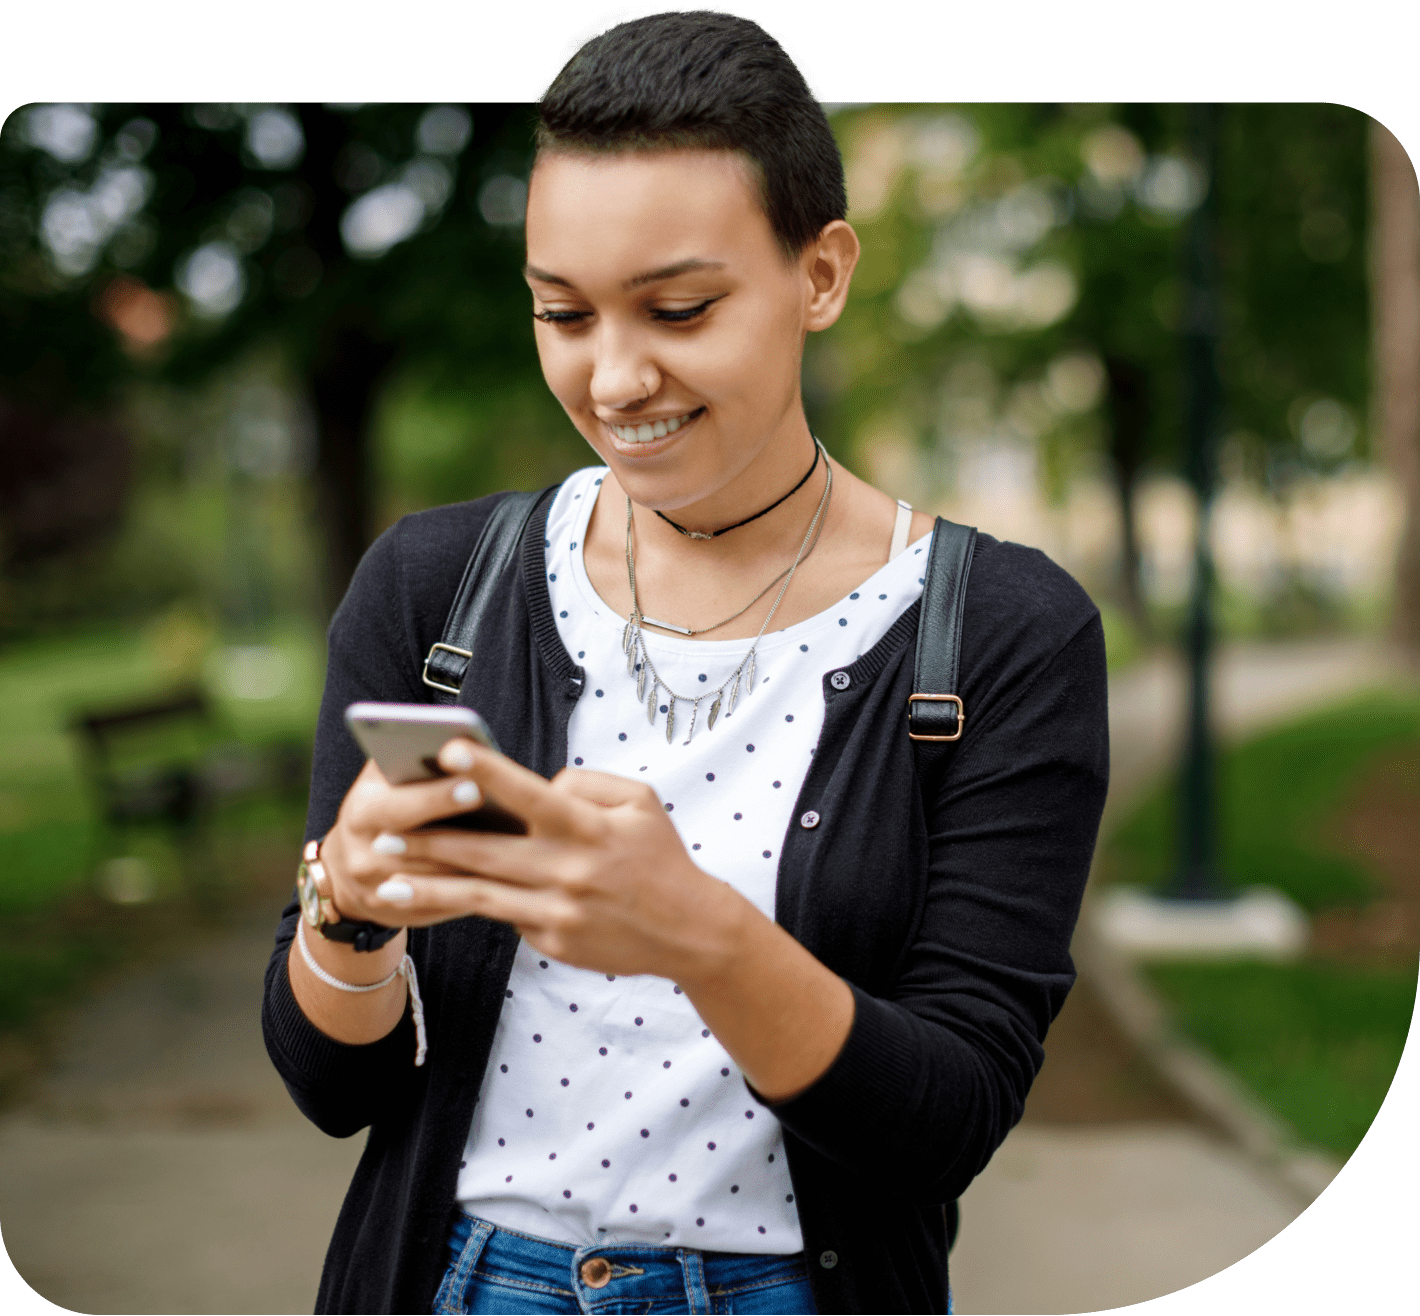 A young adult smiling as she connects with friends on a smartphone she received through the Mobility for Good program.